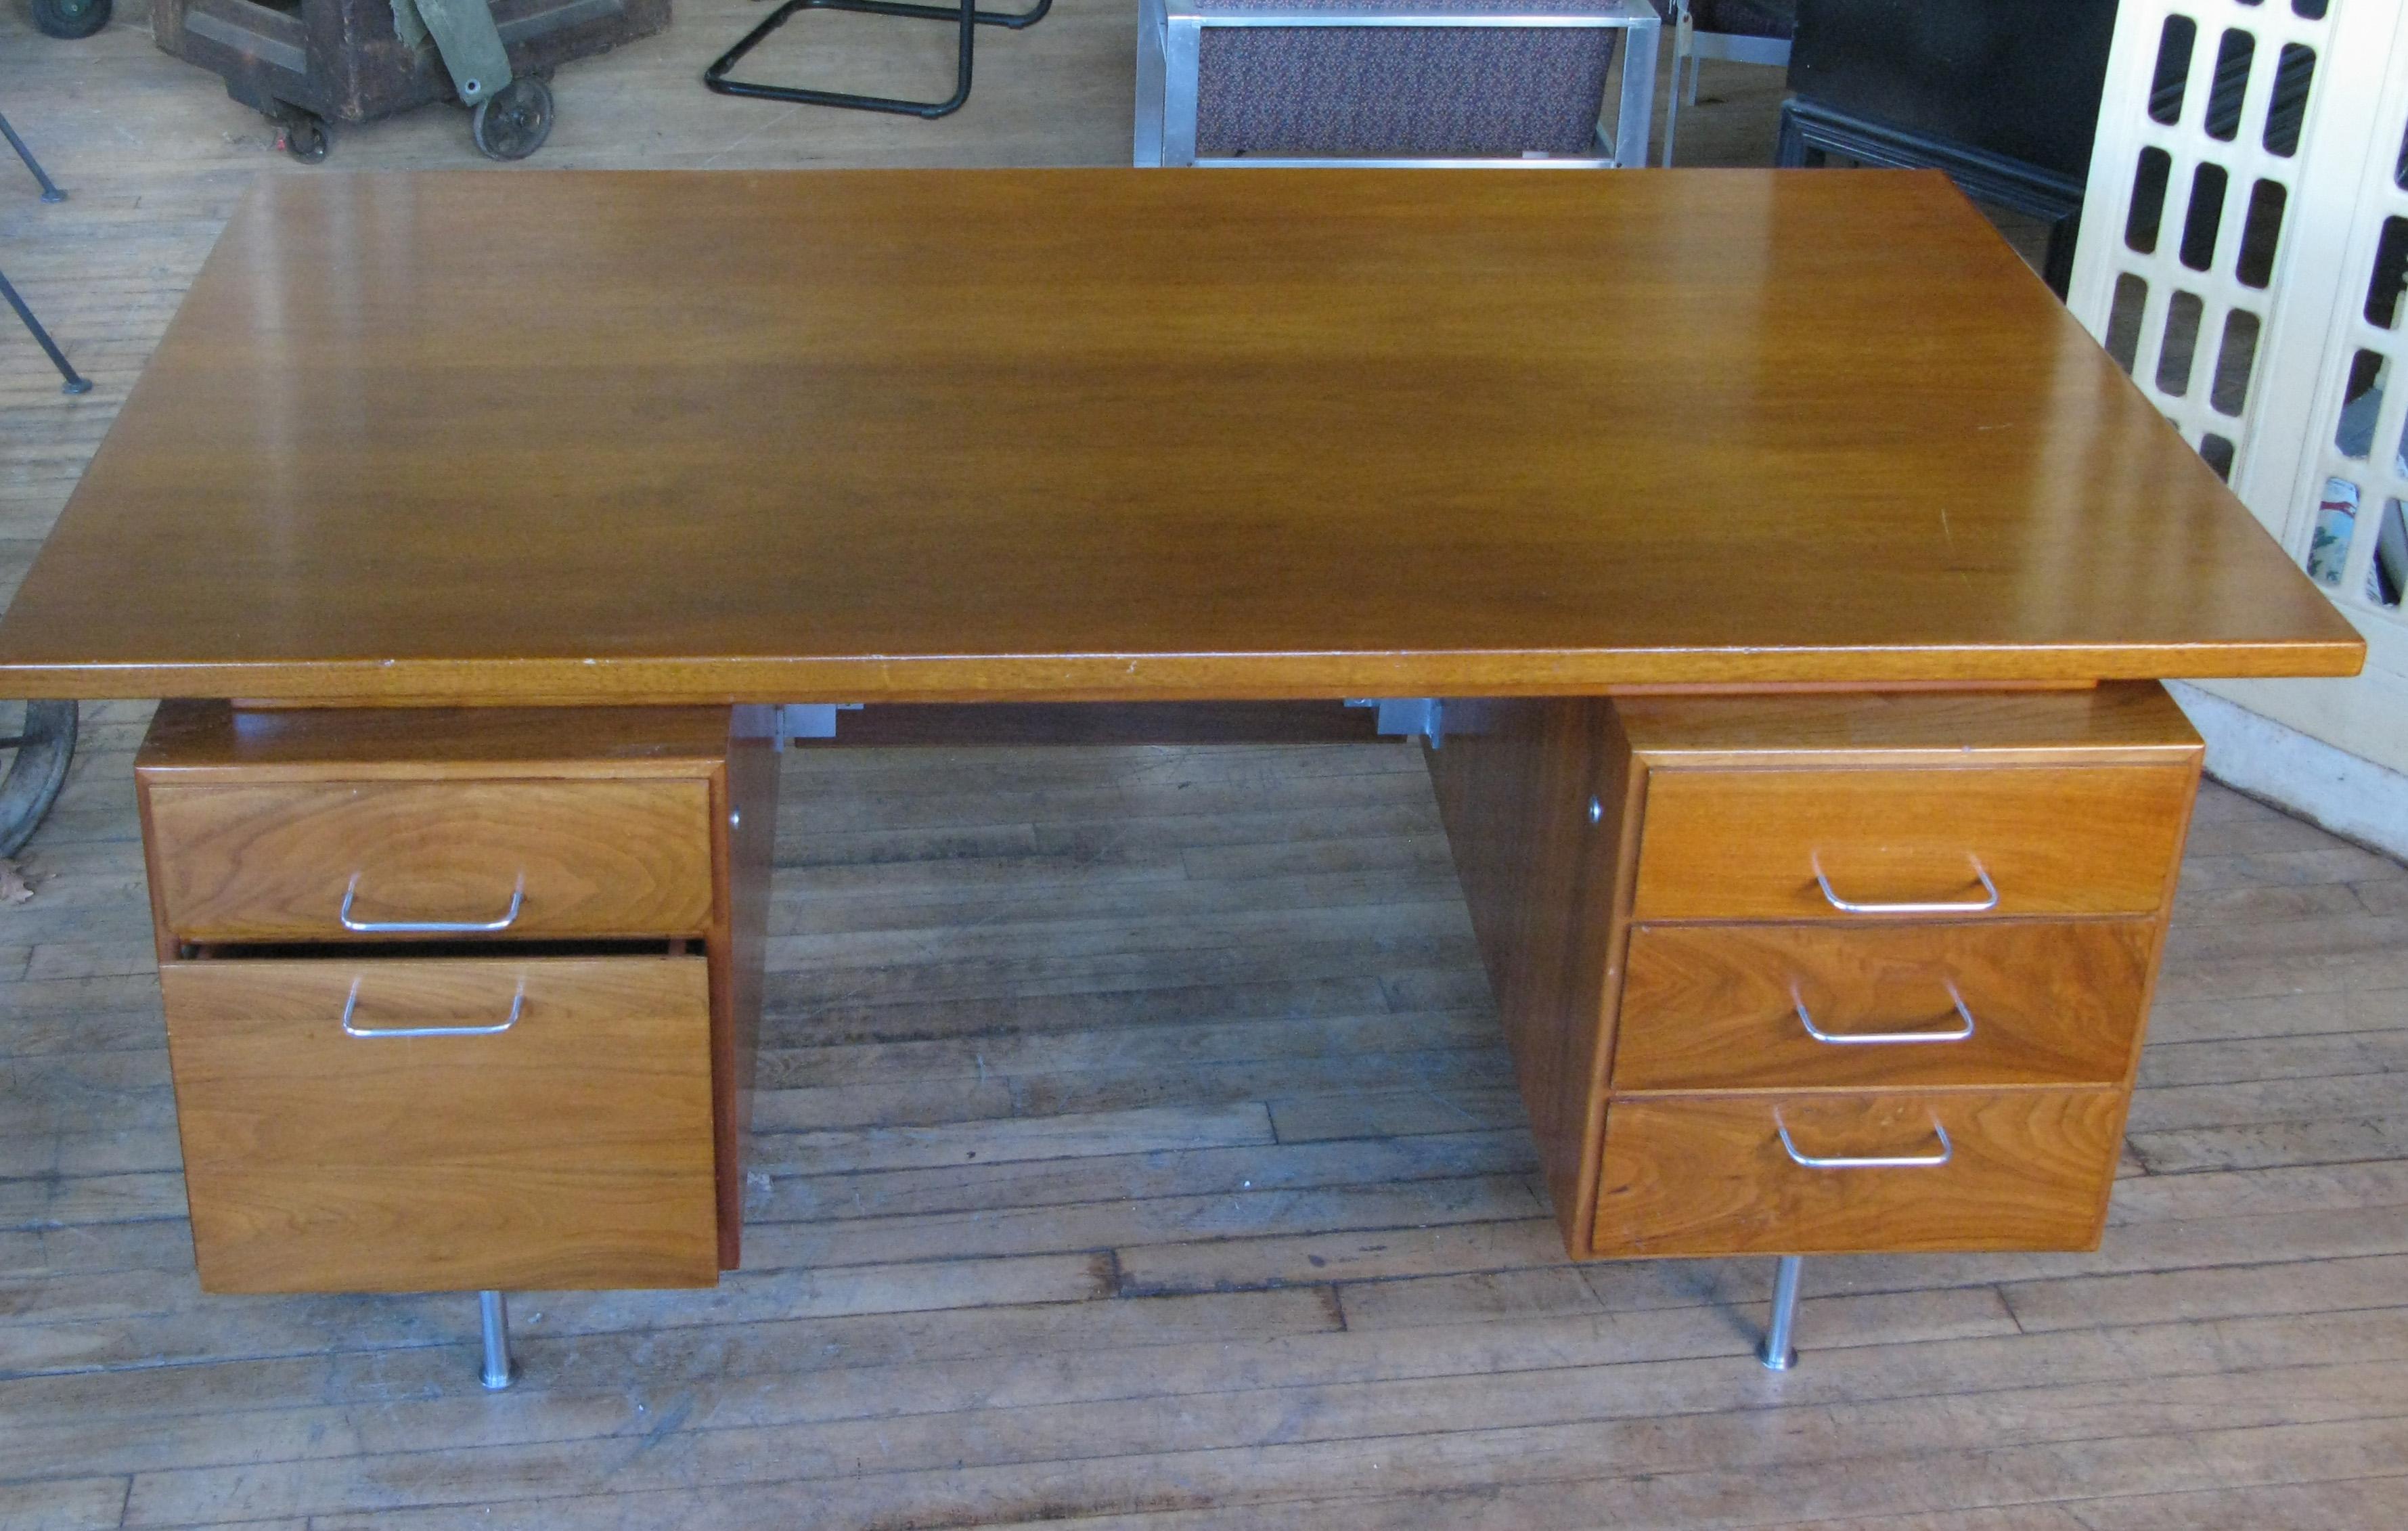 A very handsome vintage 1950s walnut executive desk designed by Jens Risom. Beautiful design with the case raised on steel legs, and with aluminum drawer pulls. This desk has the original walnut privacy screen. The drawers all have removable